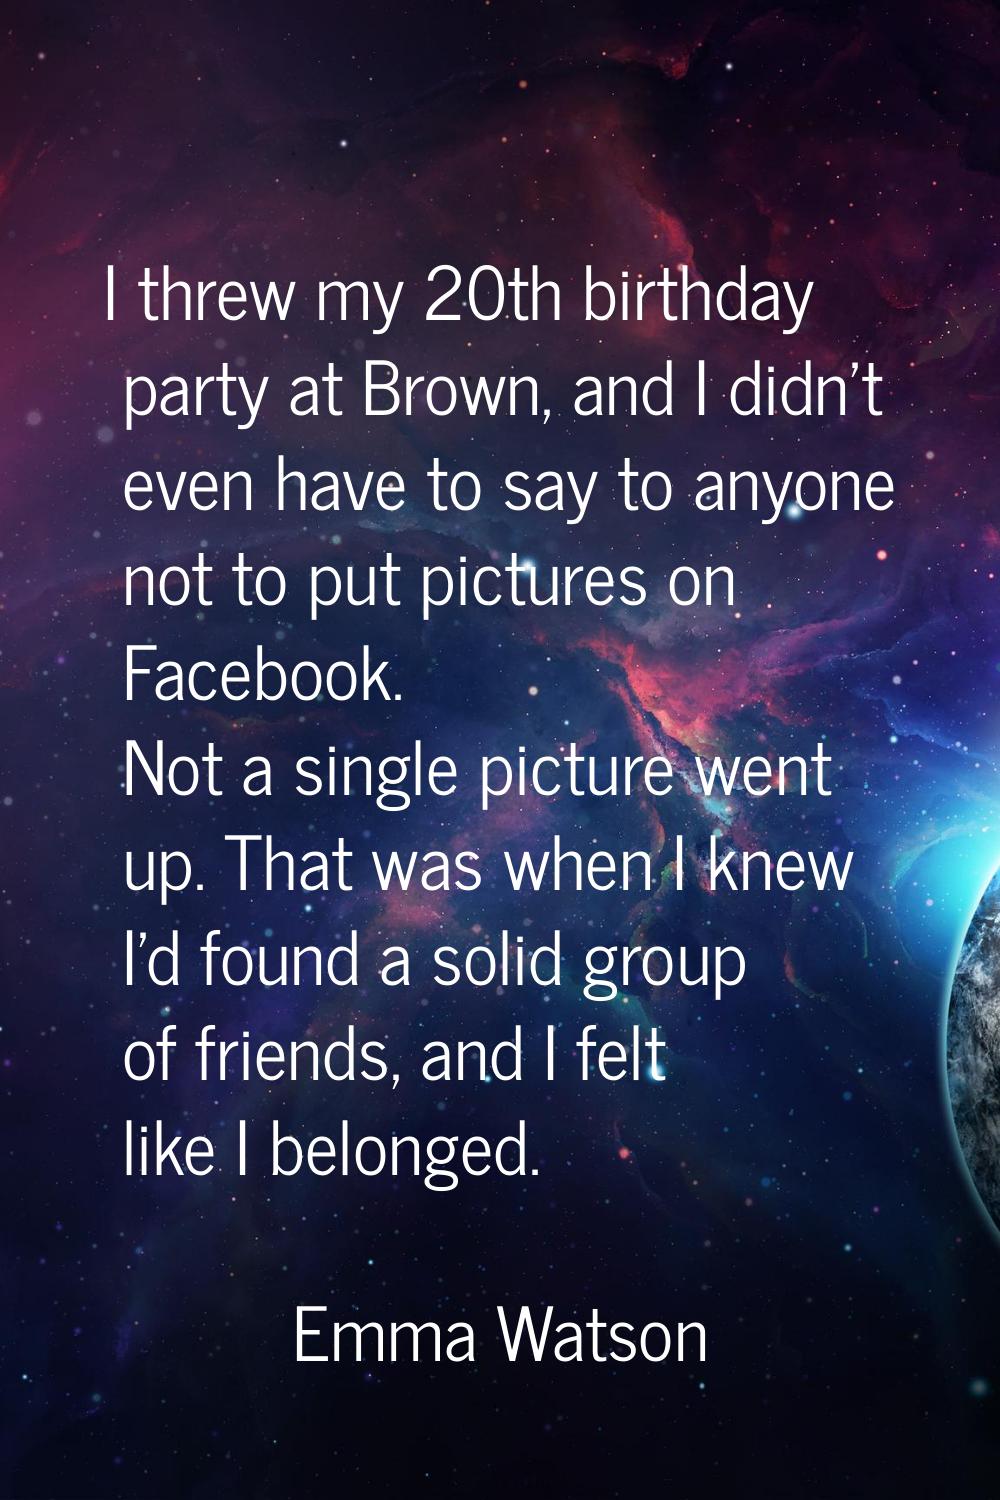 I threw my 20th birthday party at Brown, and I didn't even have to say to anyone not to put picture